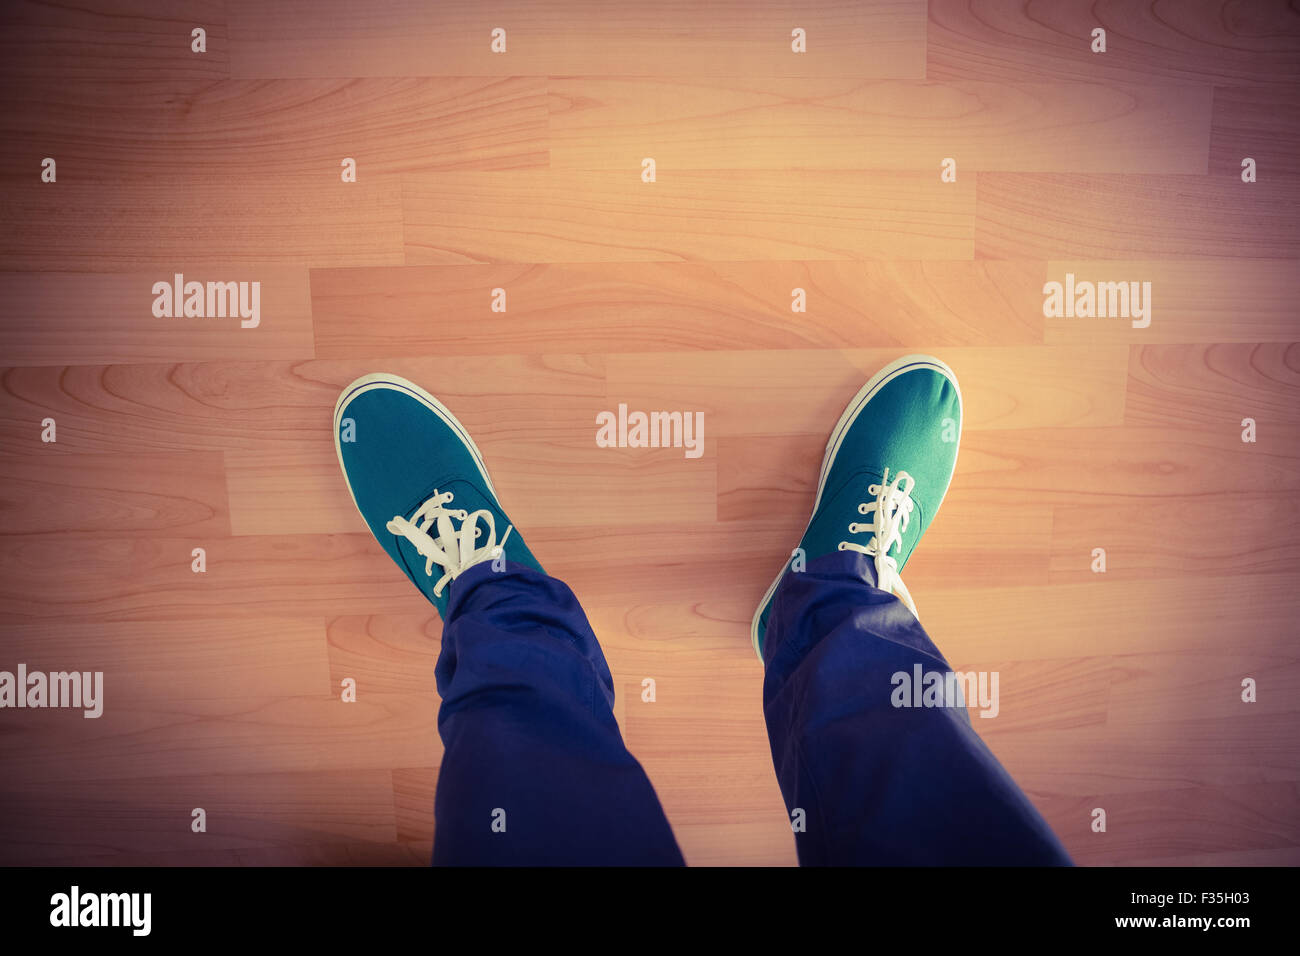 Man with canvas shoes on hardwood floor Stock Photo